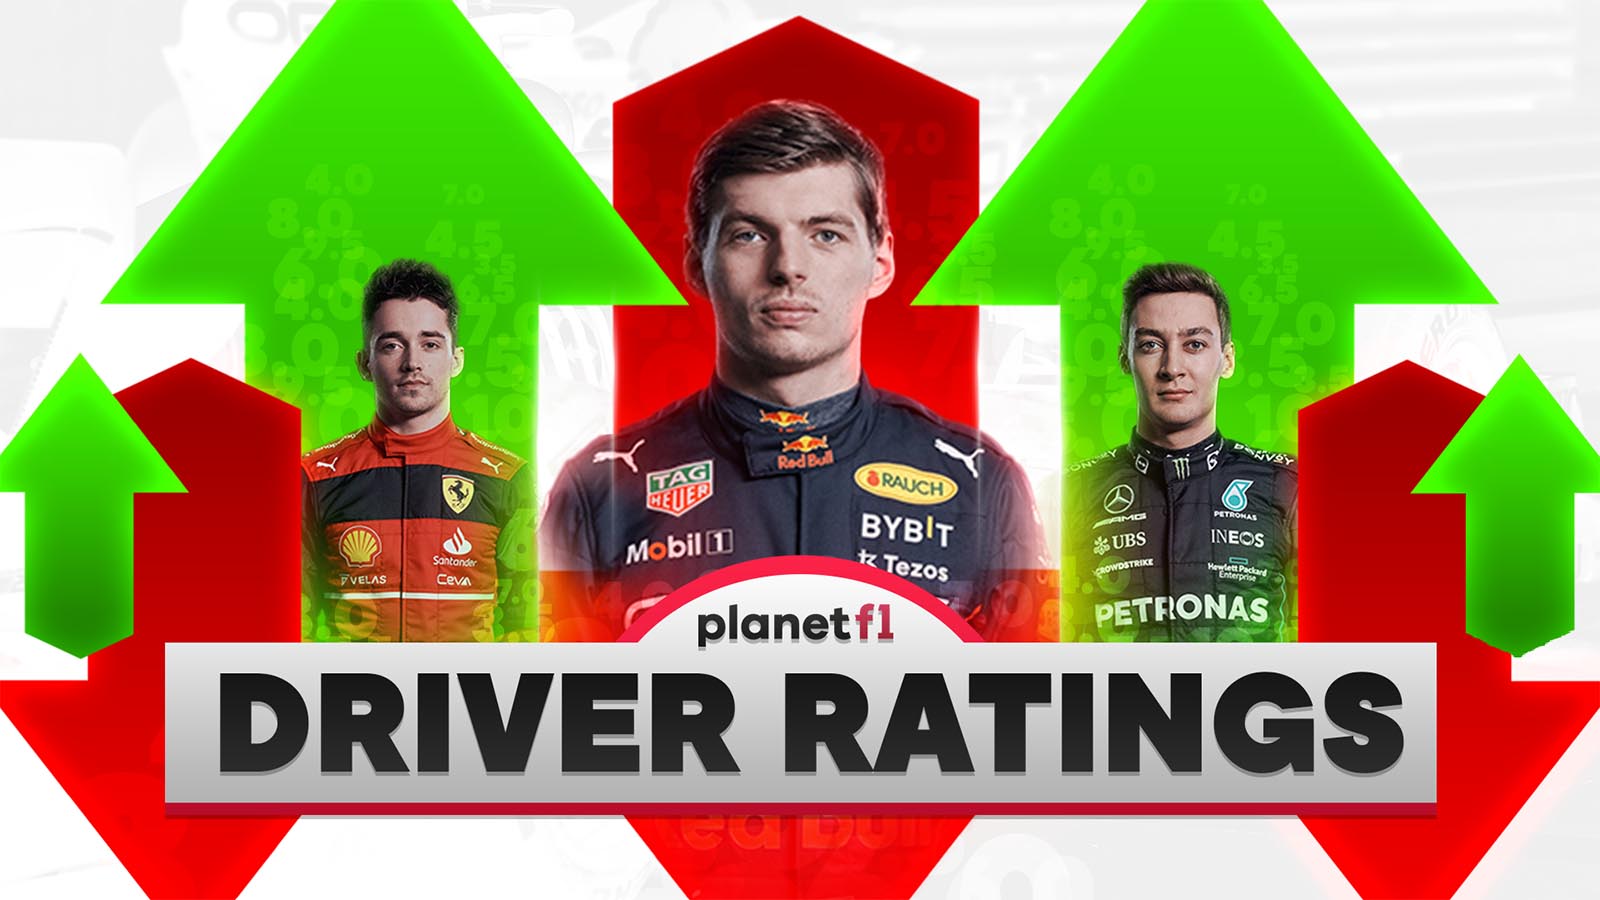 2022 Hungarian Grand Prix driver ratings from PlanetF1